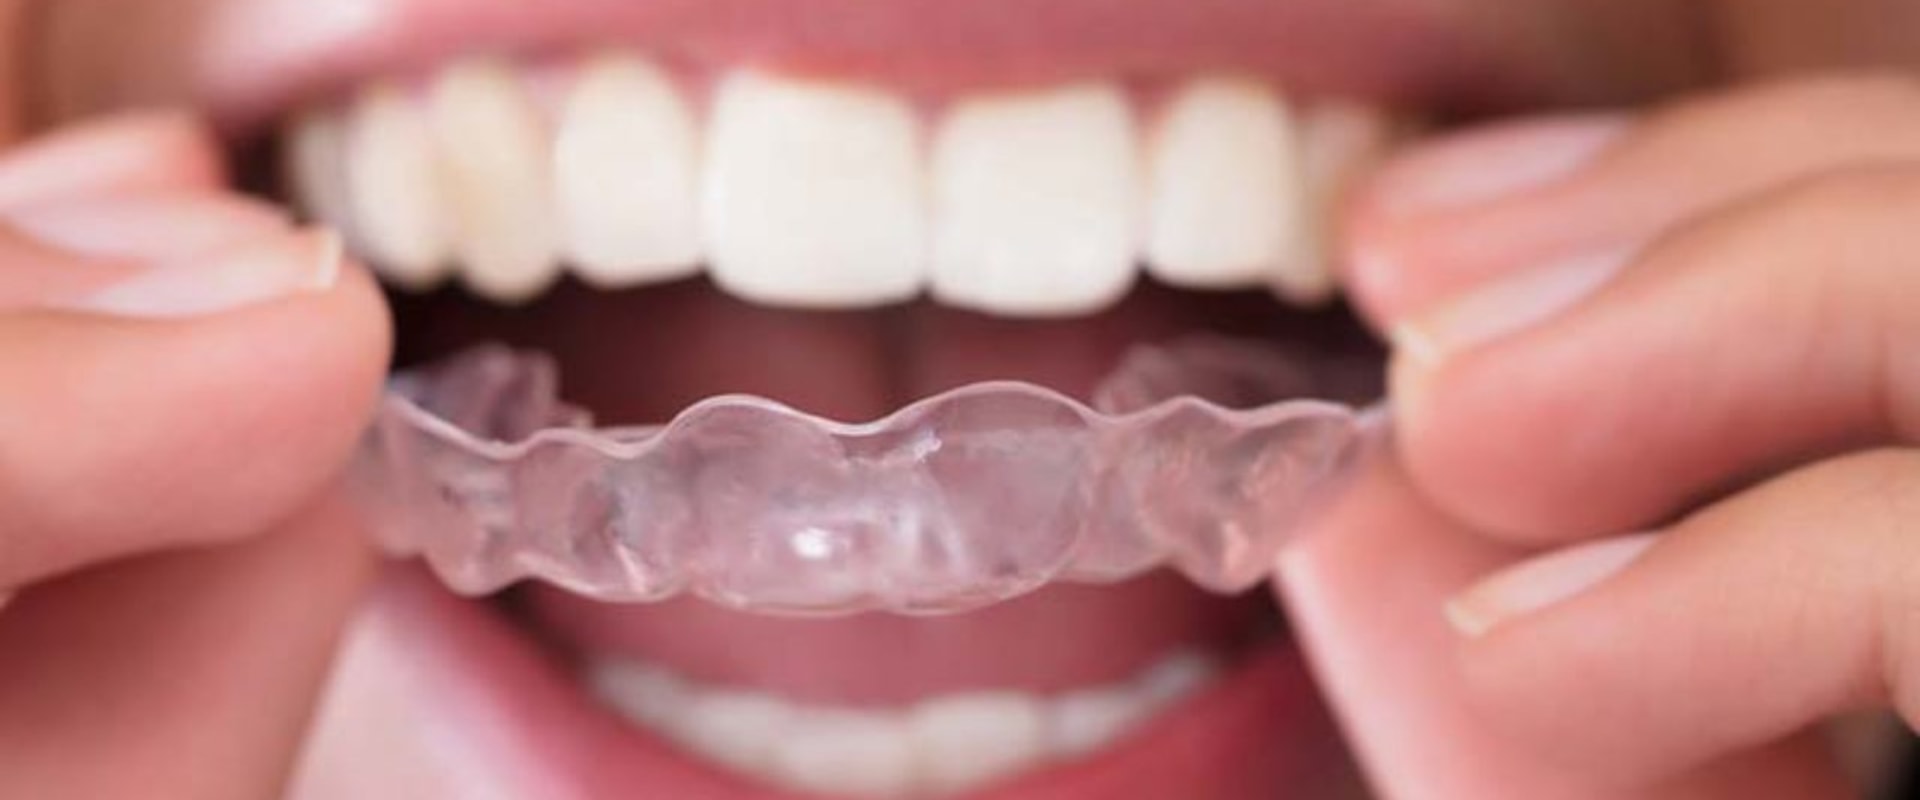 What is the last stage of invisalign?